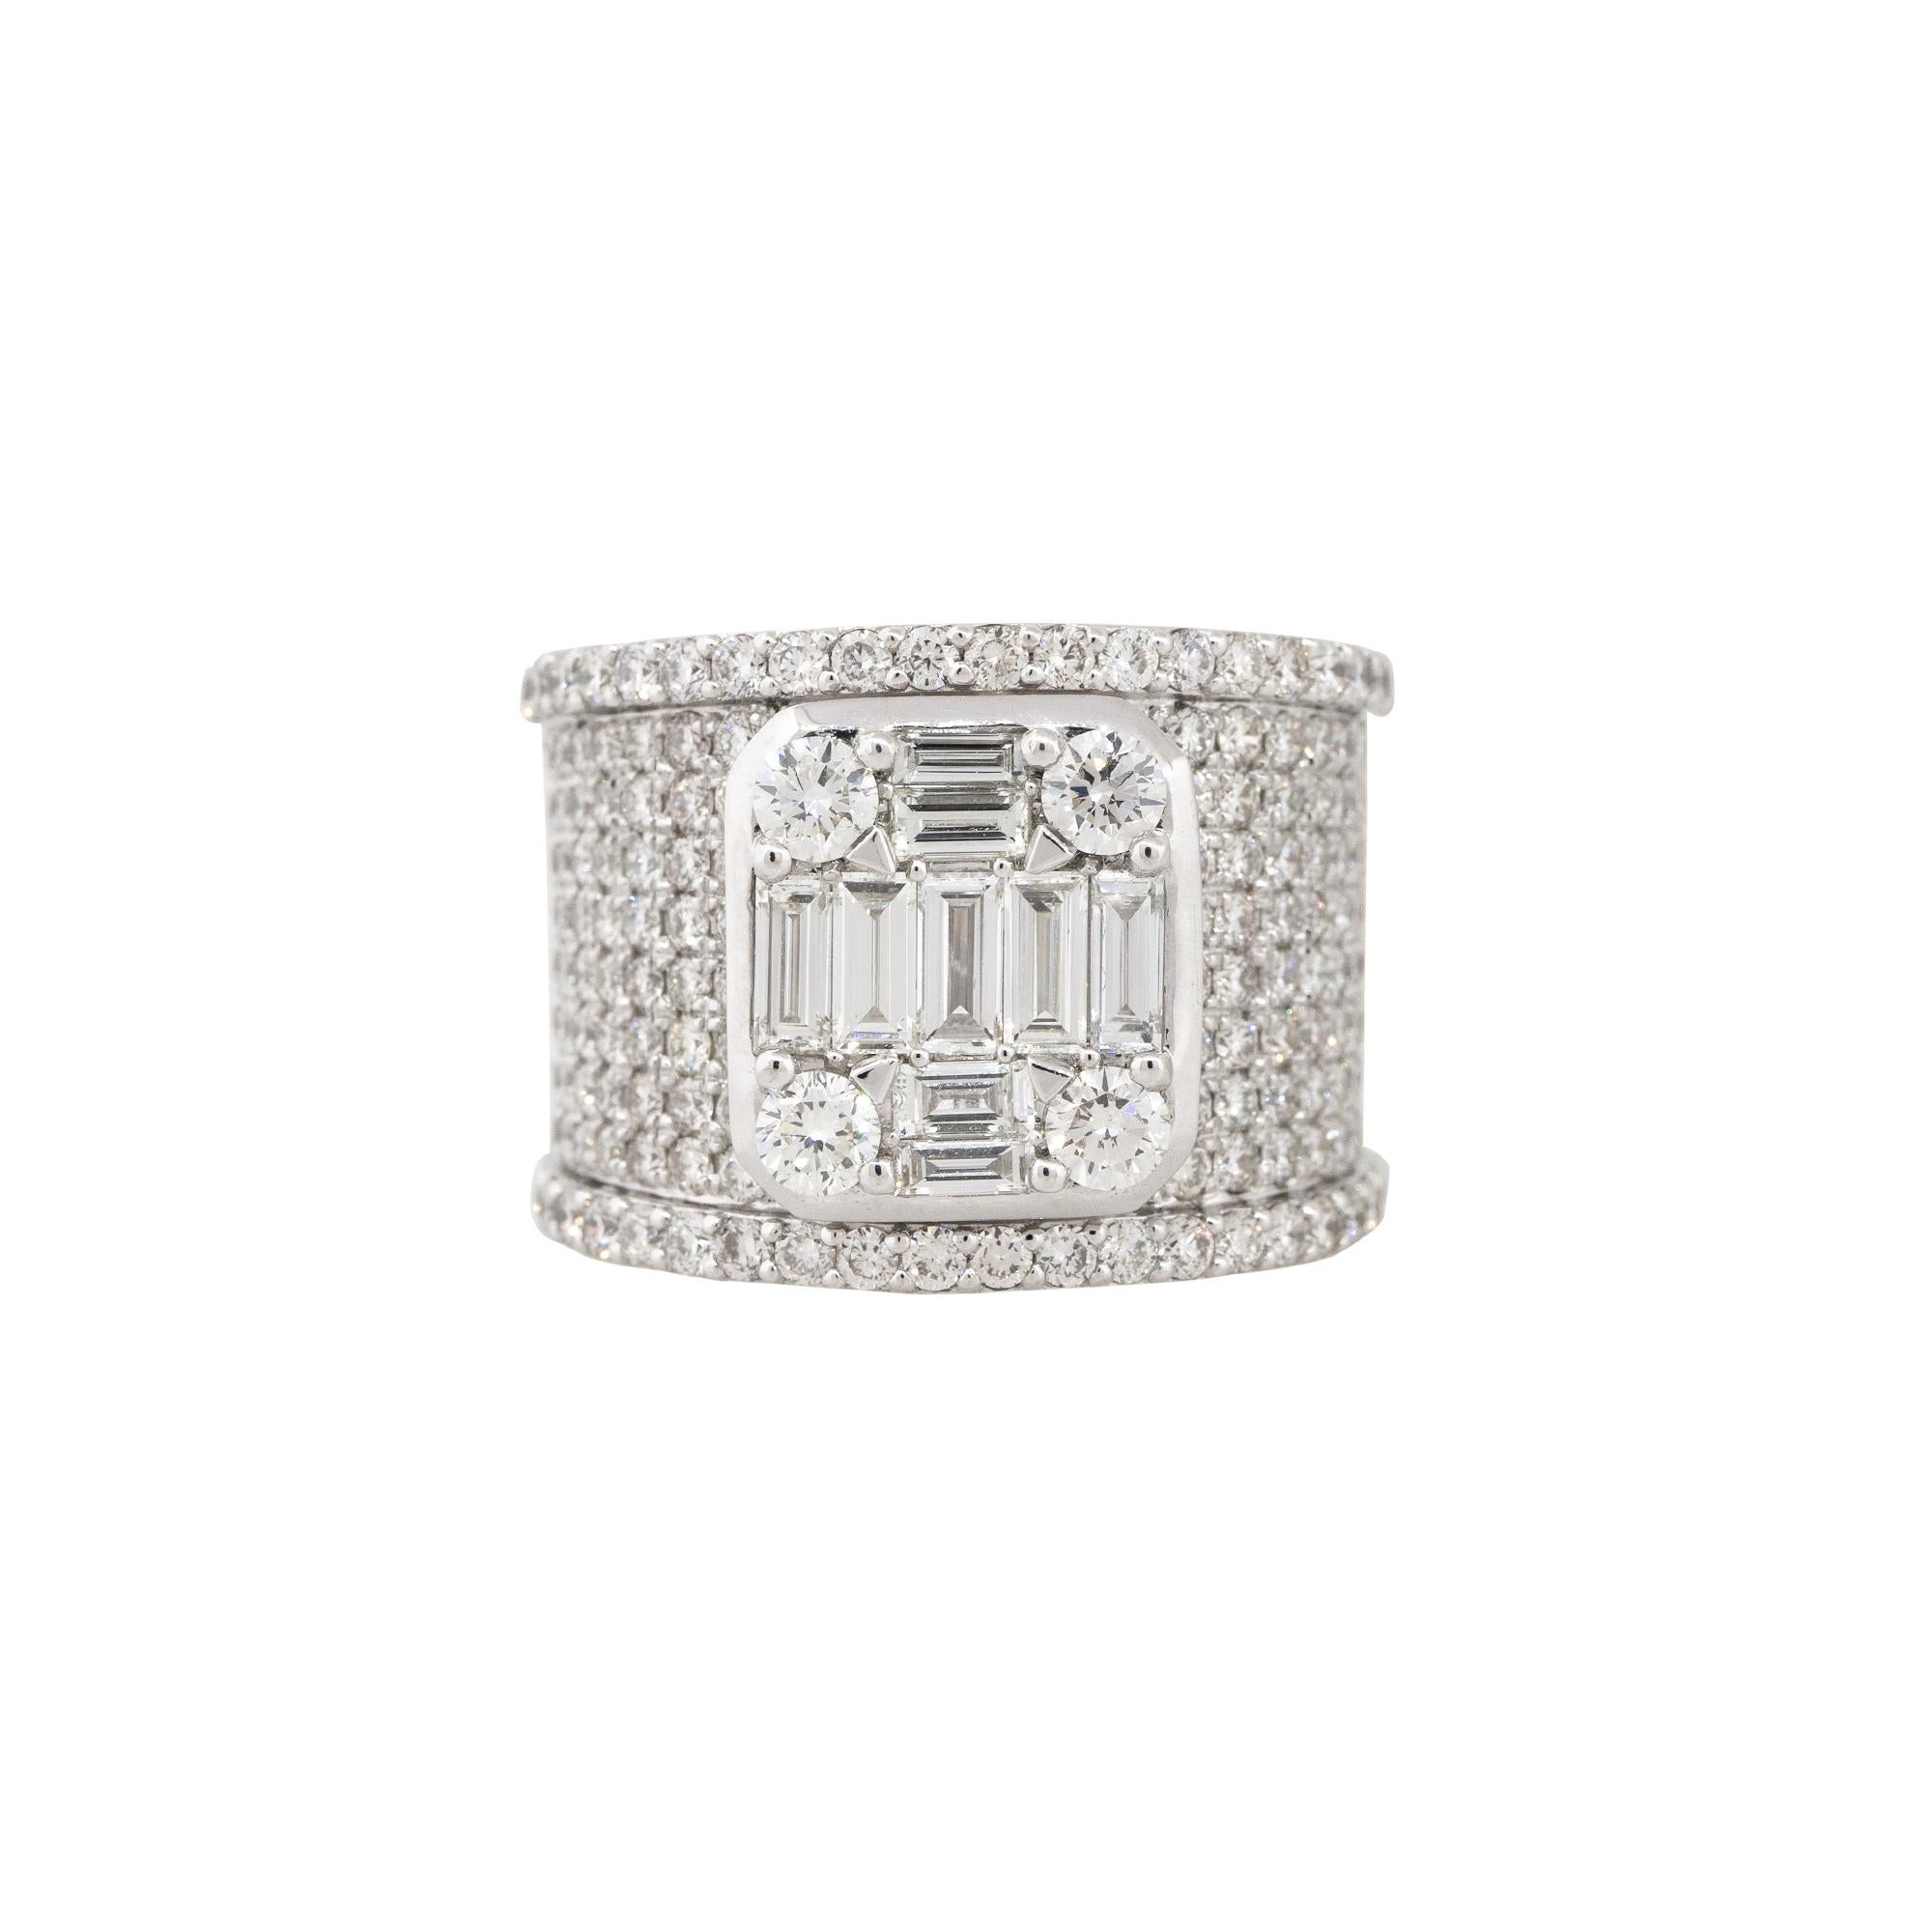 18k White Gold 3.33ctw Diamond Mosaic Pave Wide Band
Style: Women's Diamond Mosaic Style Ring
Material: 18k White Gold
Main Diamond Details: Approximately 3.33ctw of Multiple shape Diamonds. Center stones are bezel set and the stones around the band